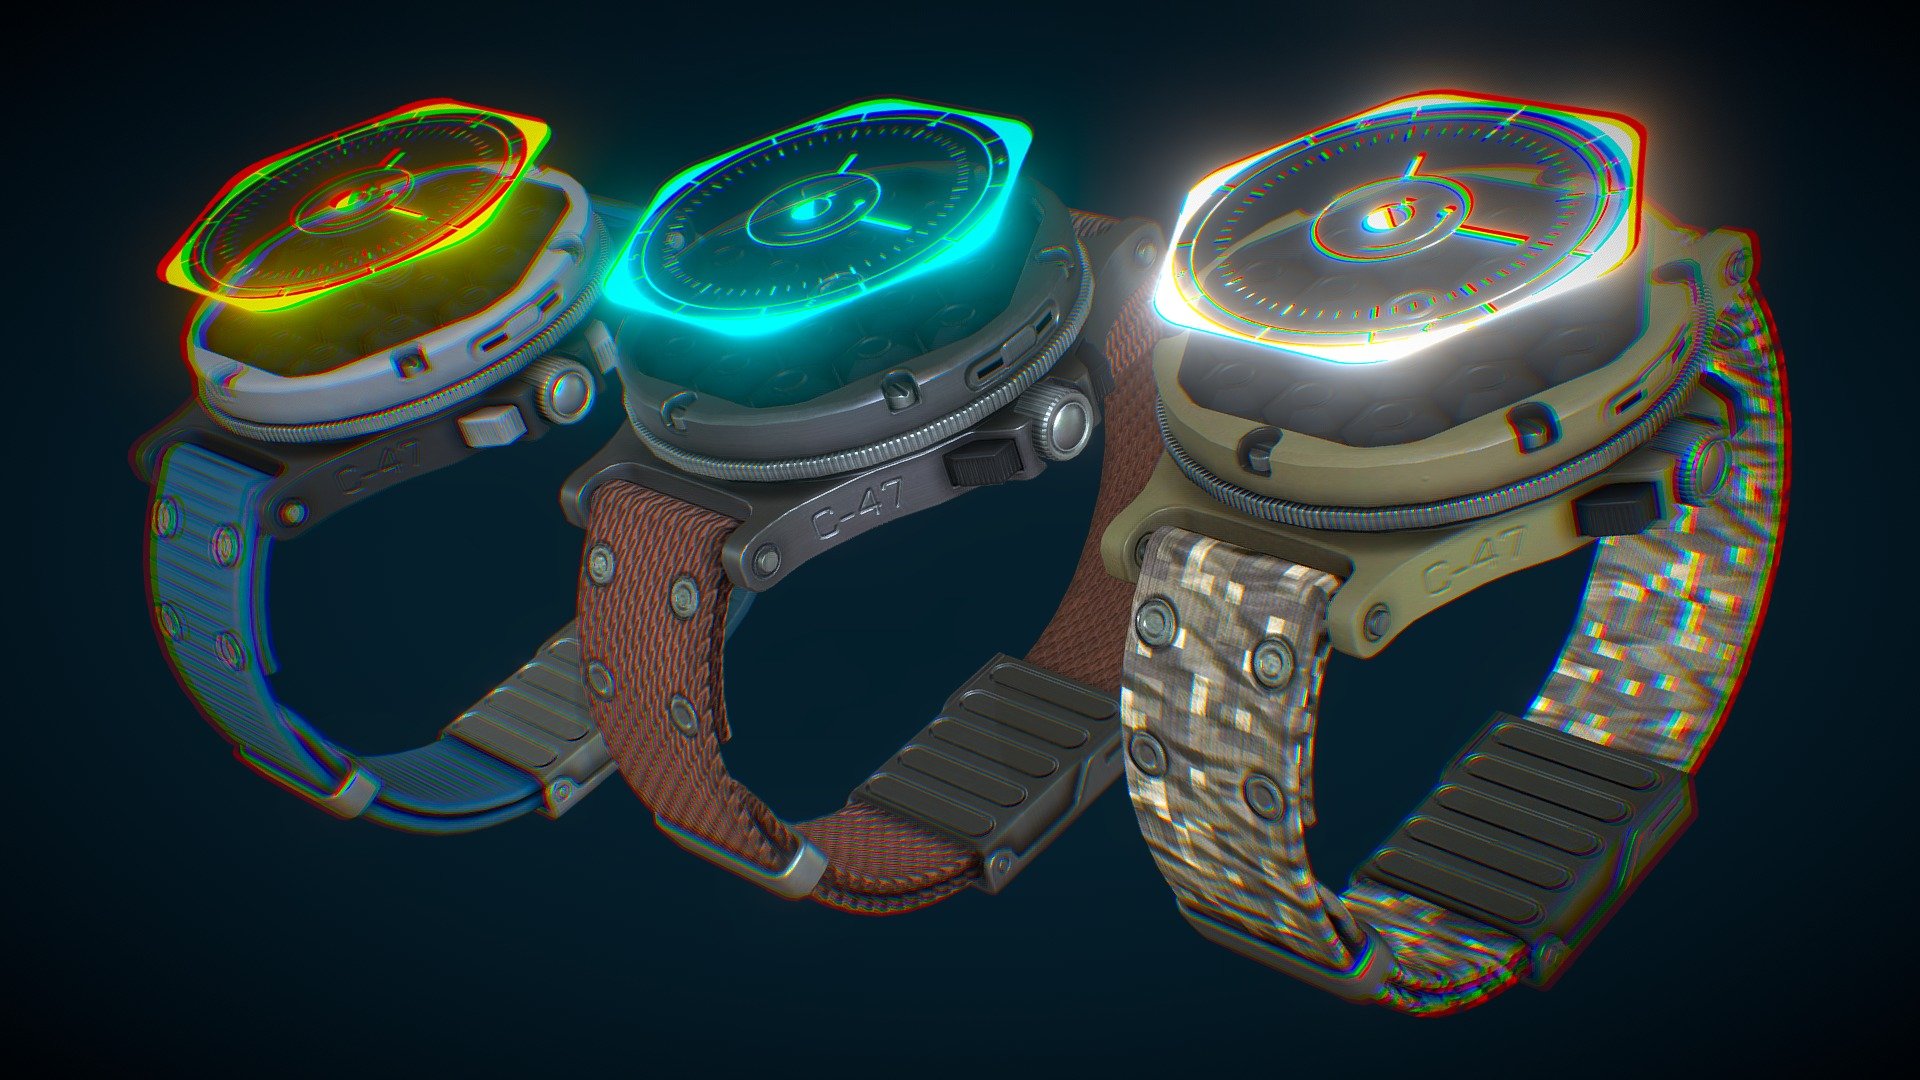 Cyberpunk themed holographic timepieces in 3 different flavours.

Modelled in Maya 2018 textured in Substance painter 2 3d model